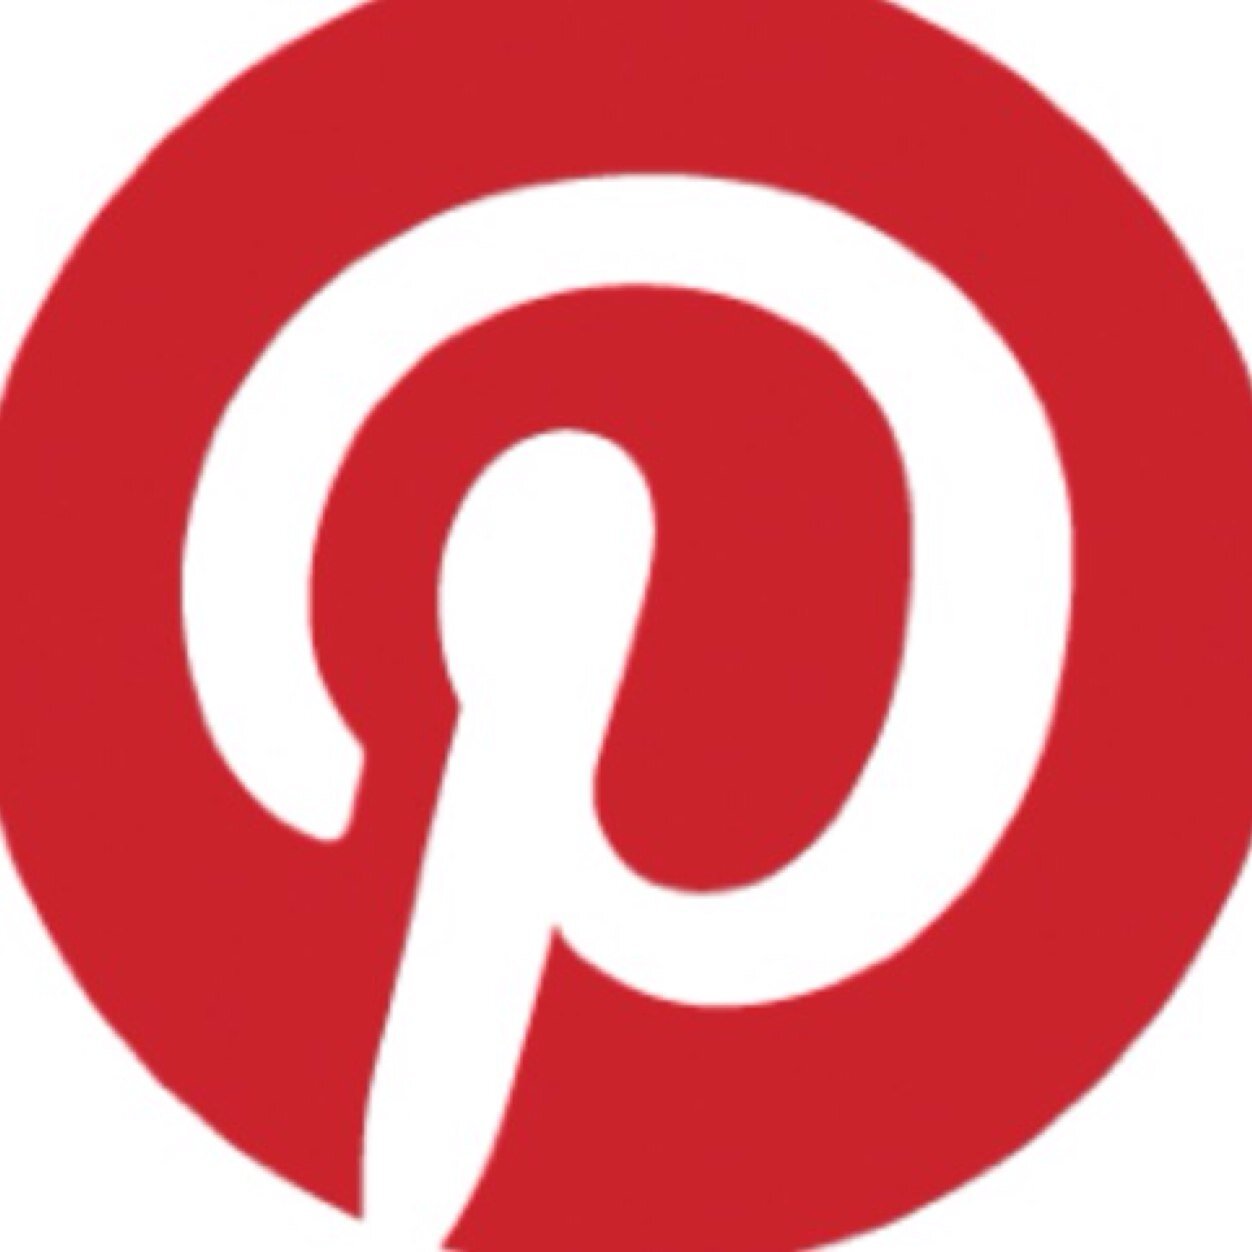 Providing you with the best of Pinterest
(Not affiliated with Pinterest)